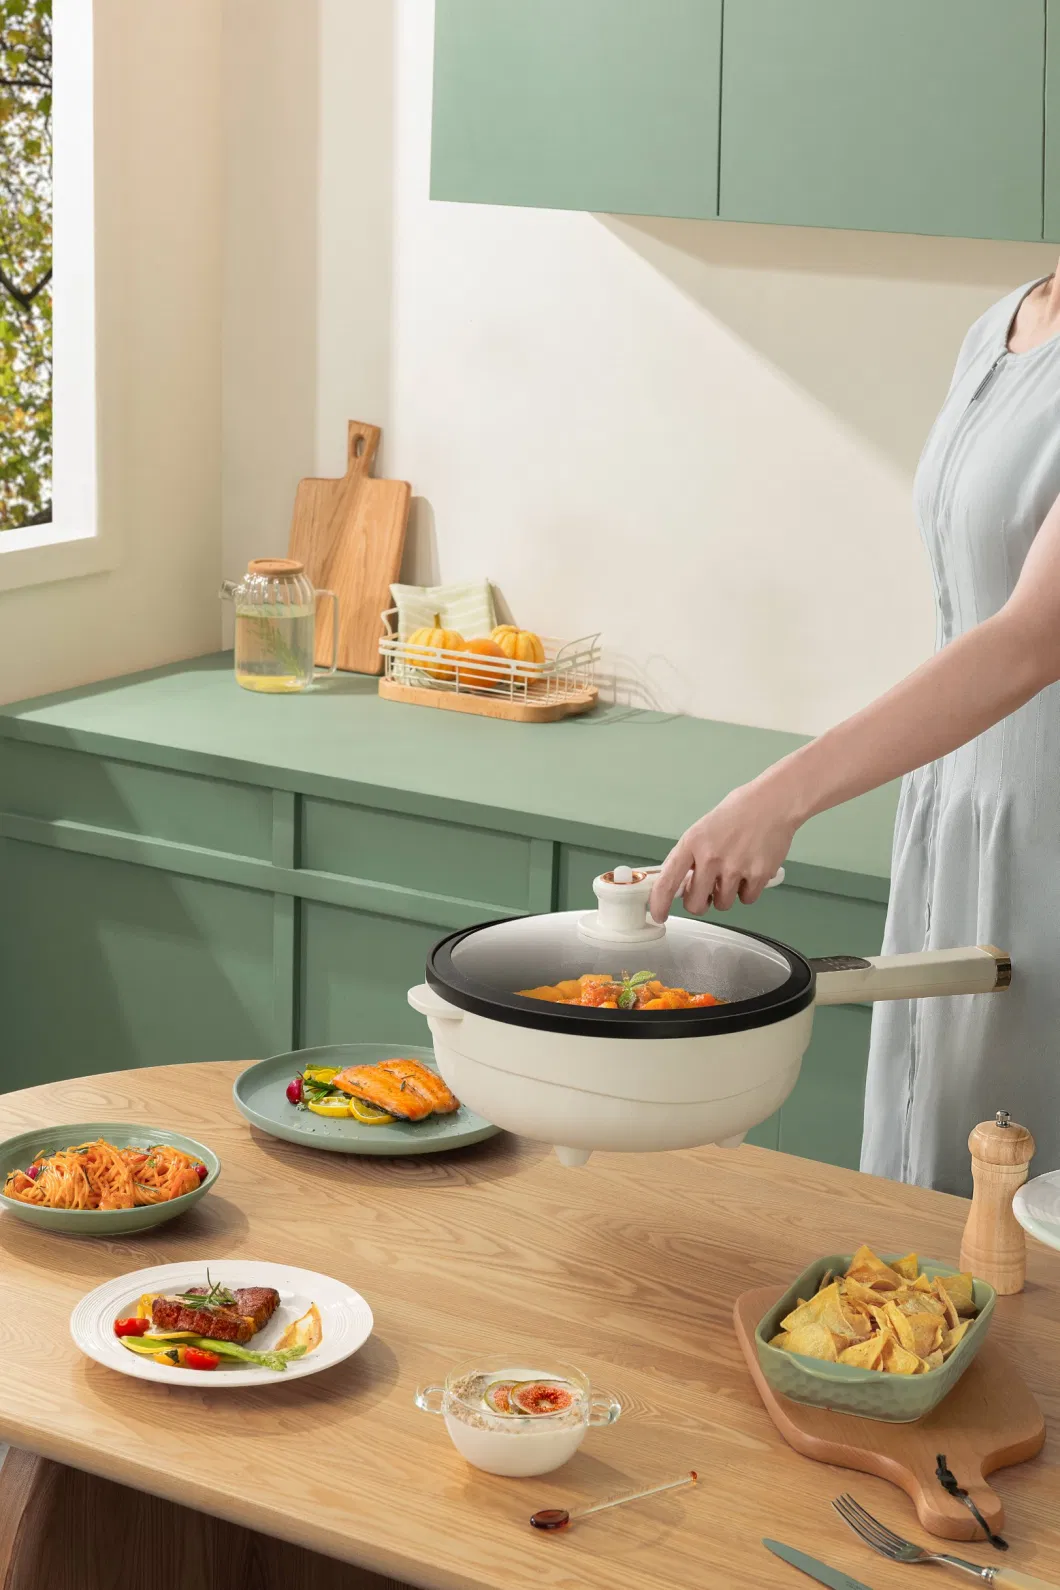 Electric Frying Pan with Fry Stir-Fry Stew Boil Steam/ Electric Roasting Pan